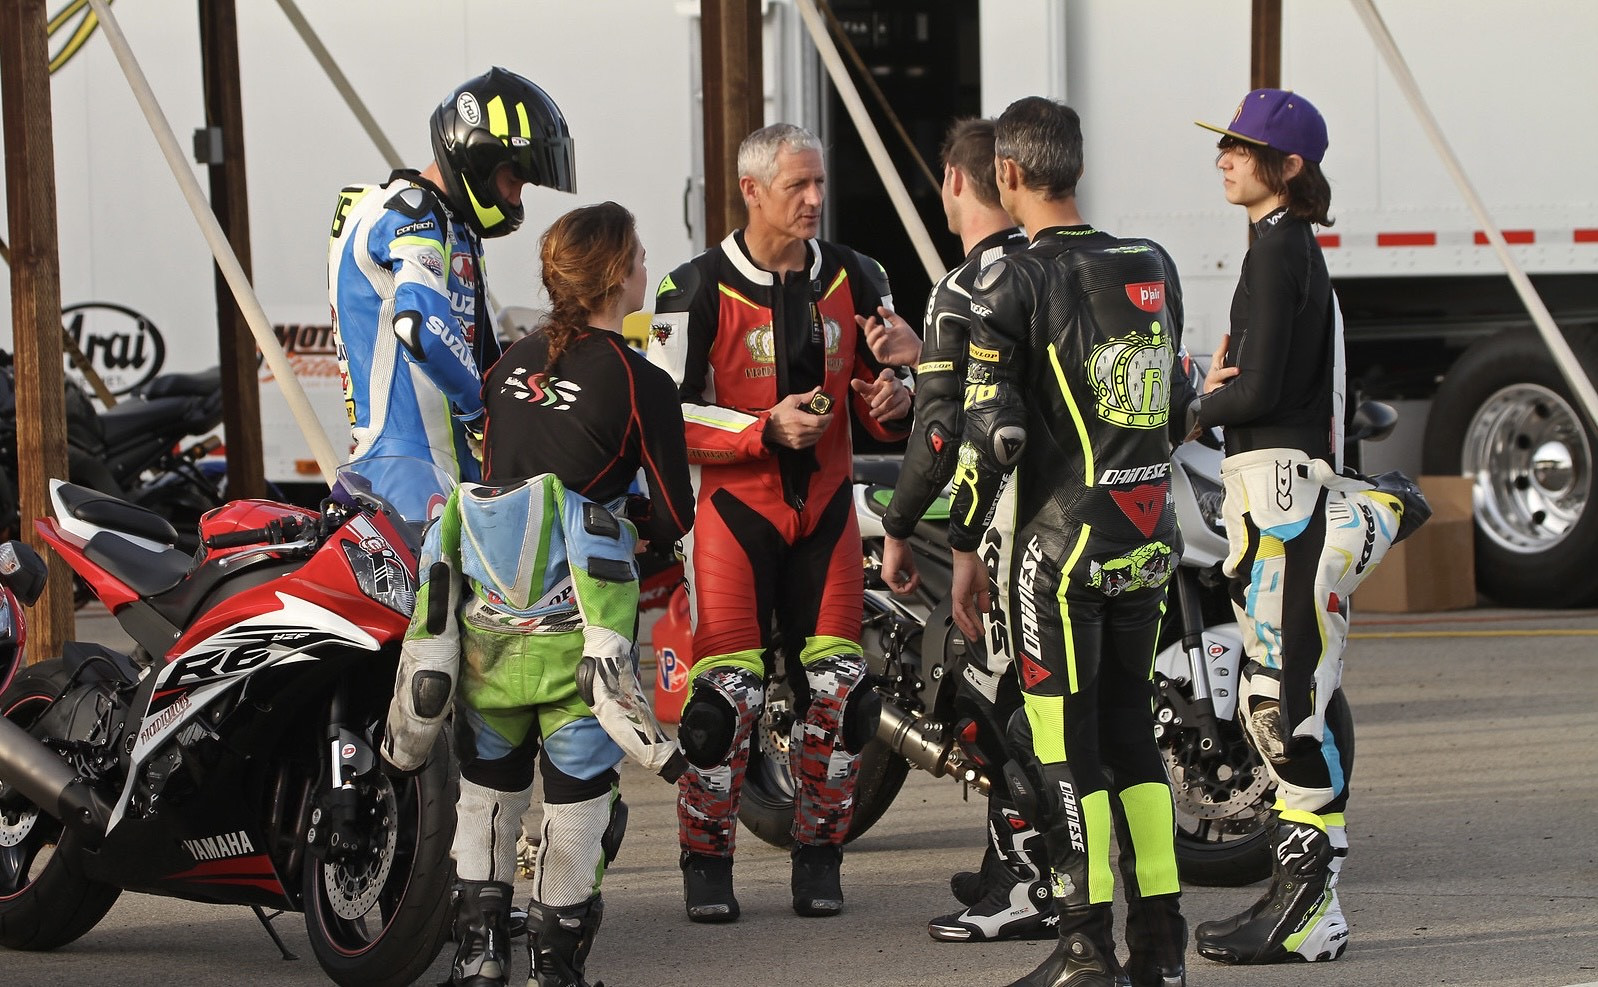 Ken Hill (in red leathers) with students and fellow riding instructors. Photo by Joe Salas, 4theRiders.com, courtesy 2Fast Motorcycle Trackdays.